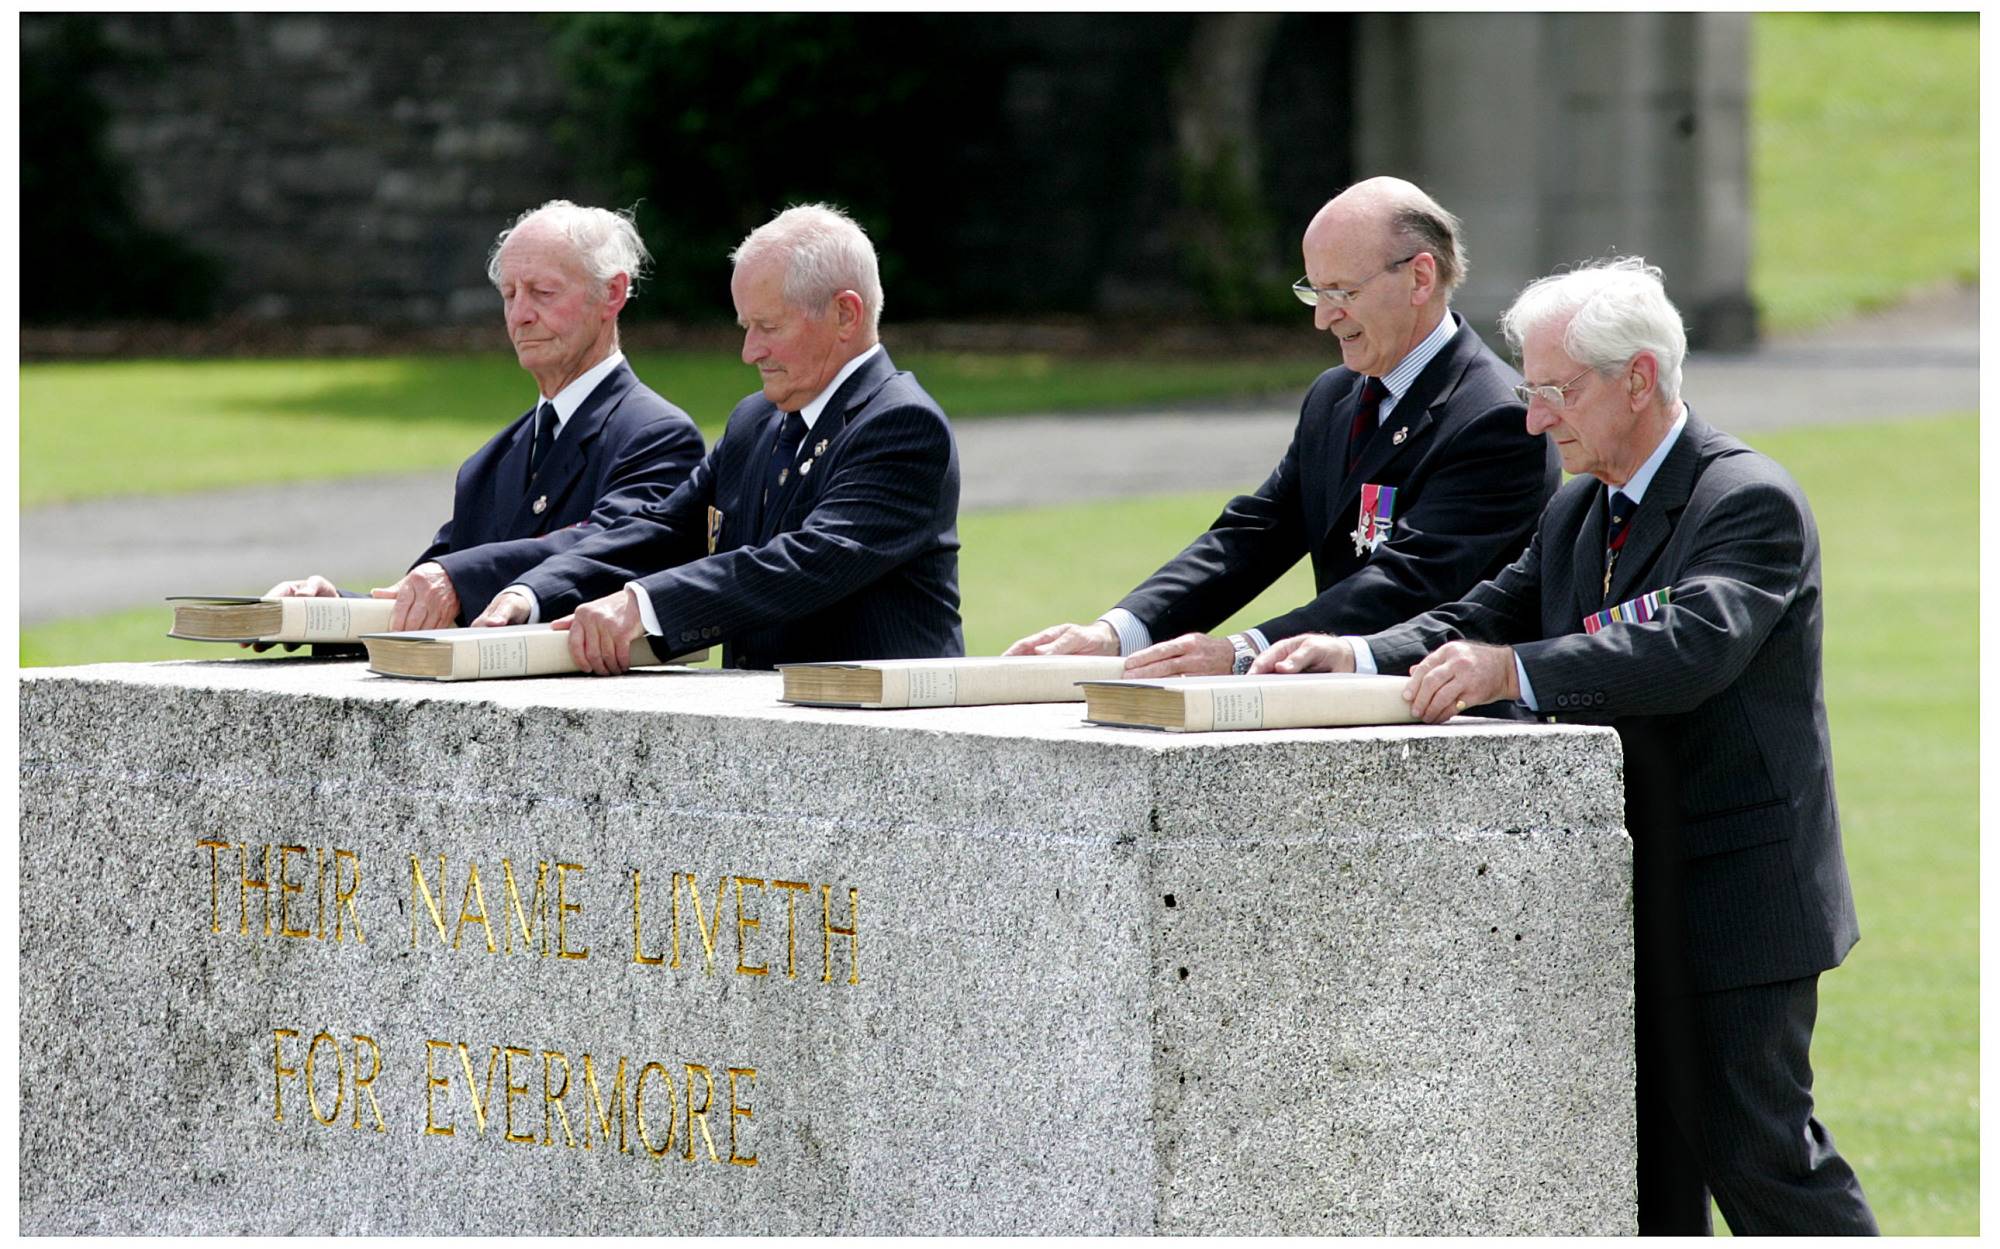 Ex-servicemen placing the Books of Remembrance on the Stone of Remembrance at the Irish National War Memorial Gardens, Islandbridge, for the Commemoration of the Battle of the Somme on Saturday 1st July, 2006. Irish Times. 